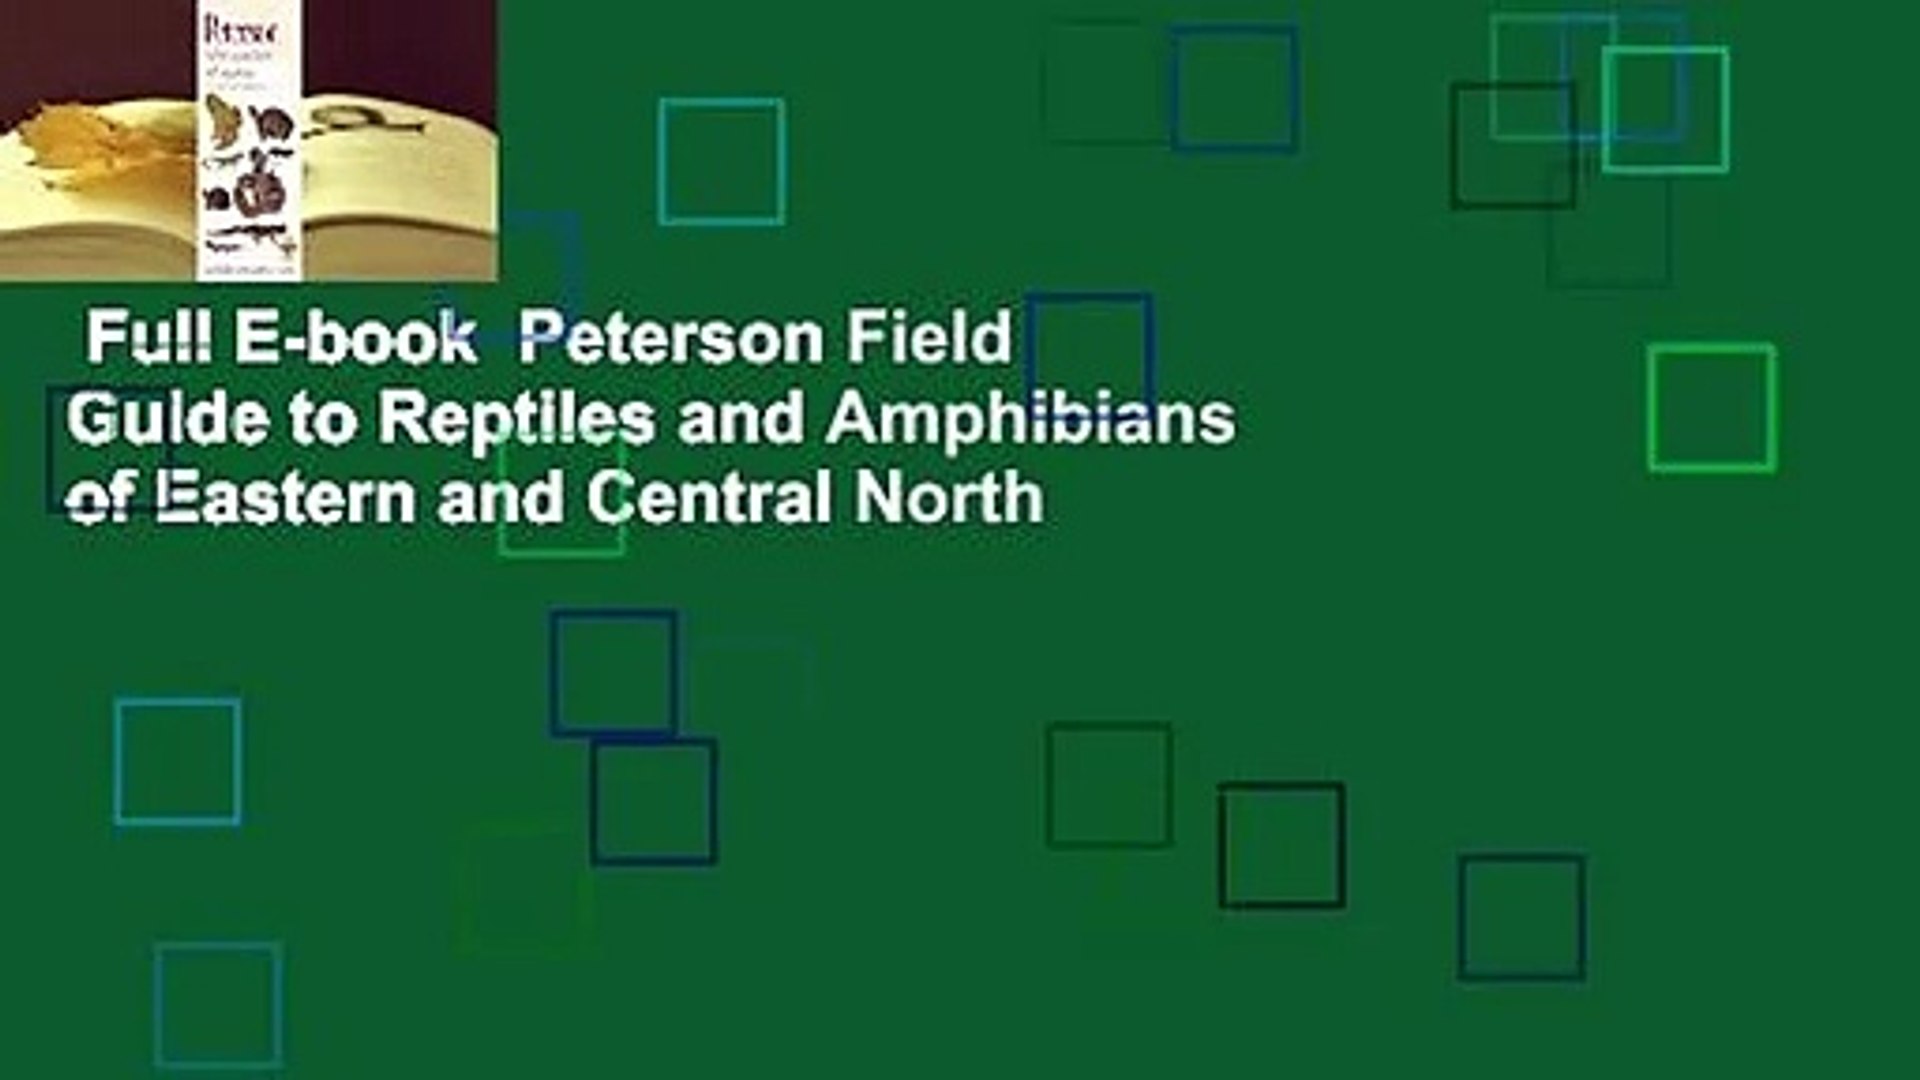 Full E-book  Peterson Field Guide to Reptiles and Amphibians of Eastern and Central North